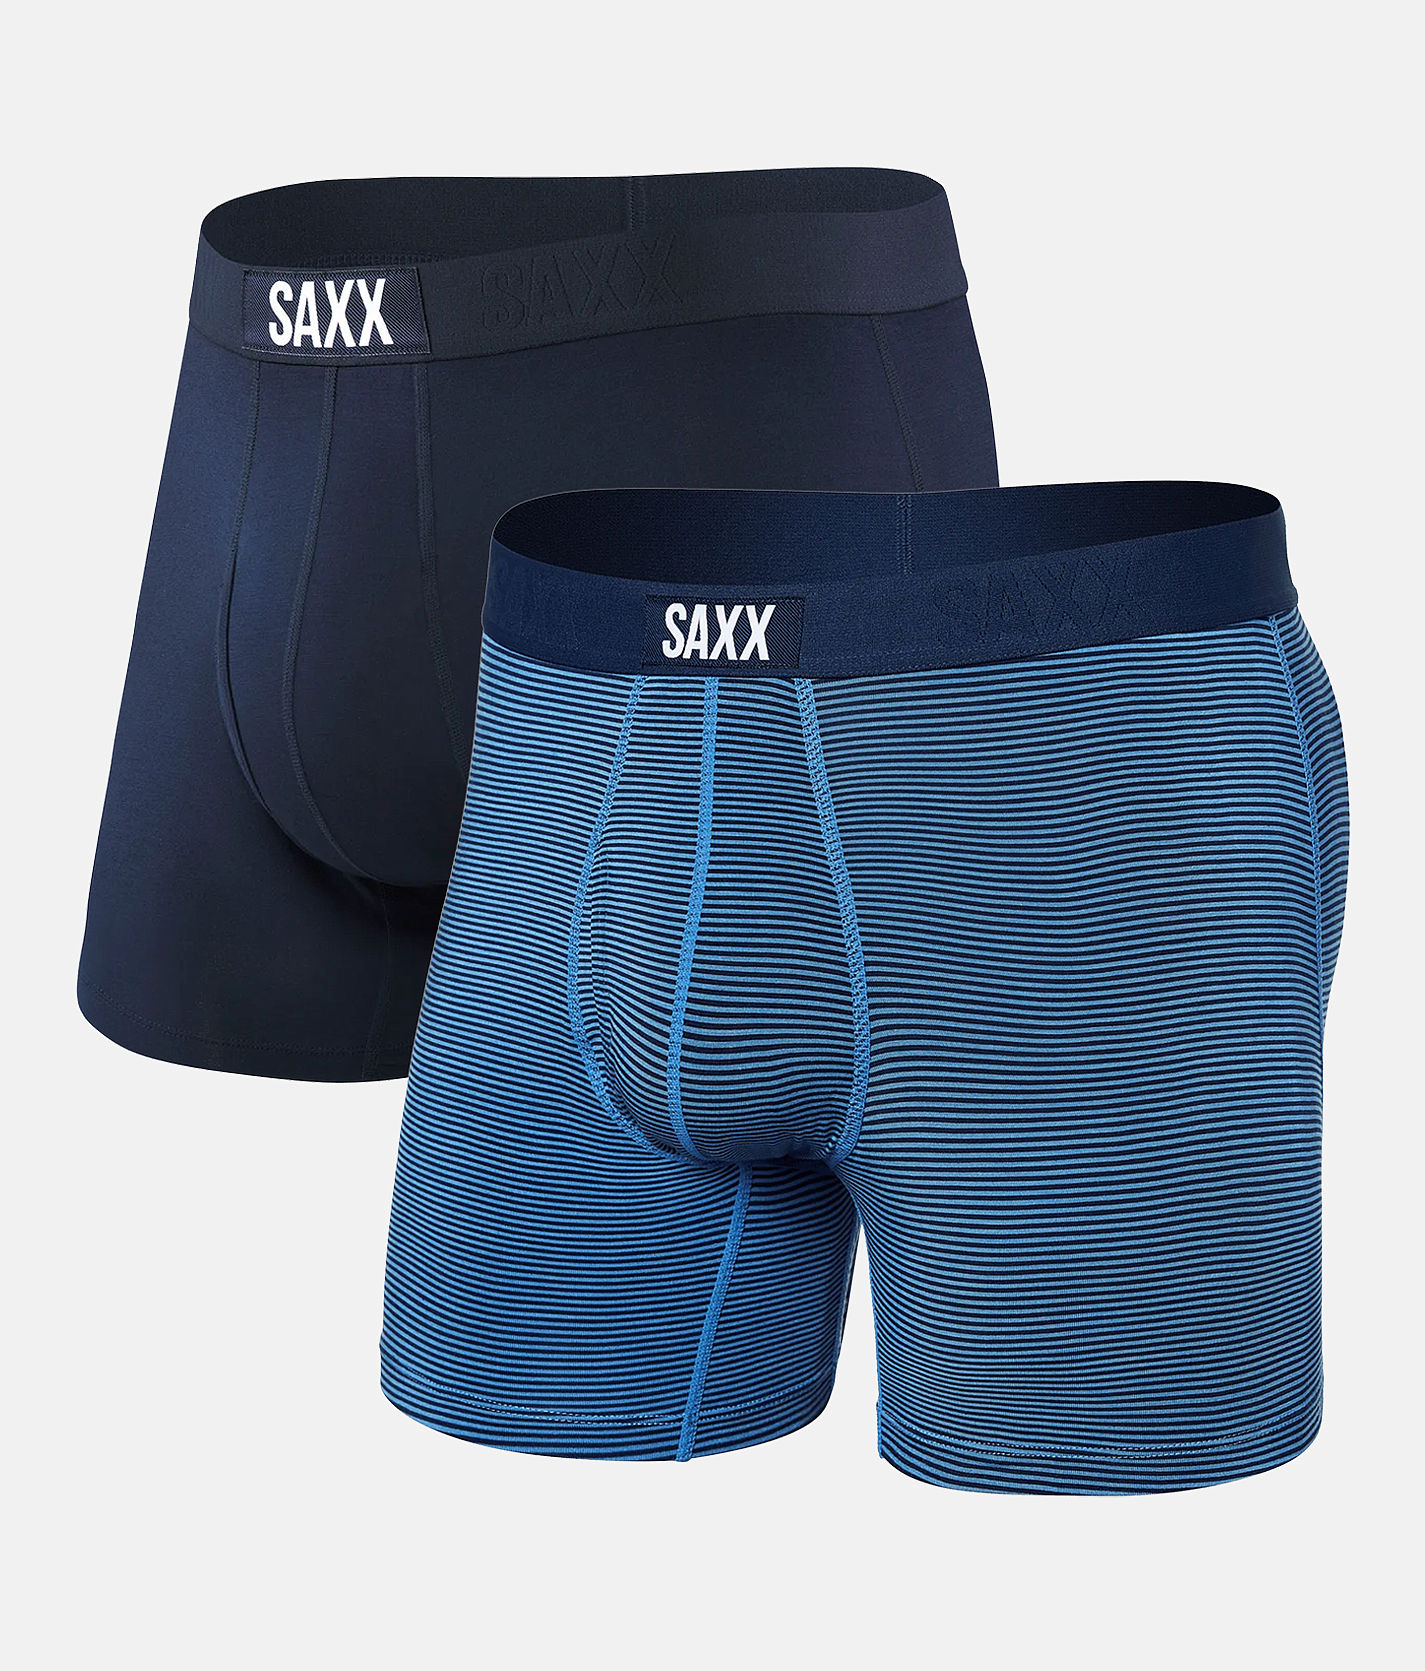 Saxx Men's Underwear - Ultra Super Soft Briefs with Fly and Built-in Pouch  Support - Underwear for Men, Pack of 2, Black/Navy, X-Small : :  Clothing, Shoes & Accessories